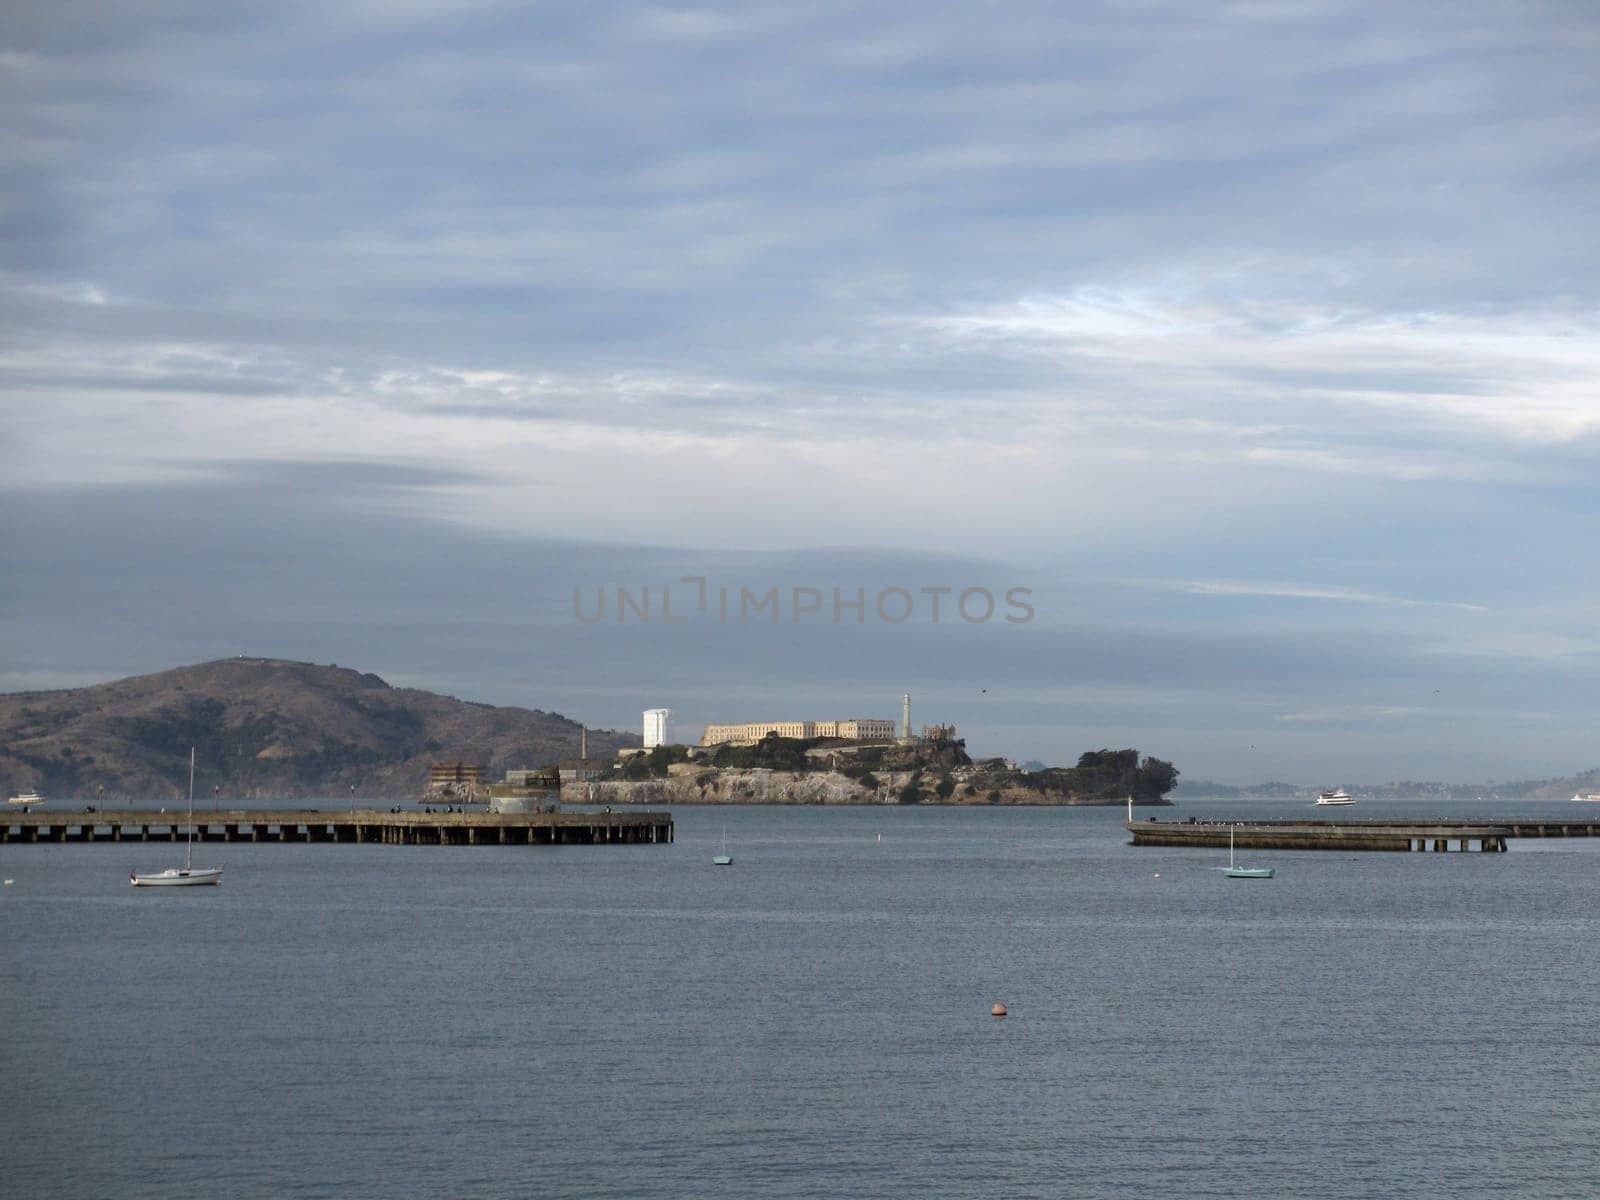 San Francisco - December 28, 2011: Long pier extending into the bay, leading towards Alcatraz Island under a cloudy sky. The photo shows several small boats scattered across the calm water, adding to the tranquil atmosphere. The photo is taken from a low angle, looking up at the pier and the island.